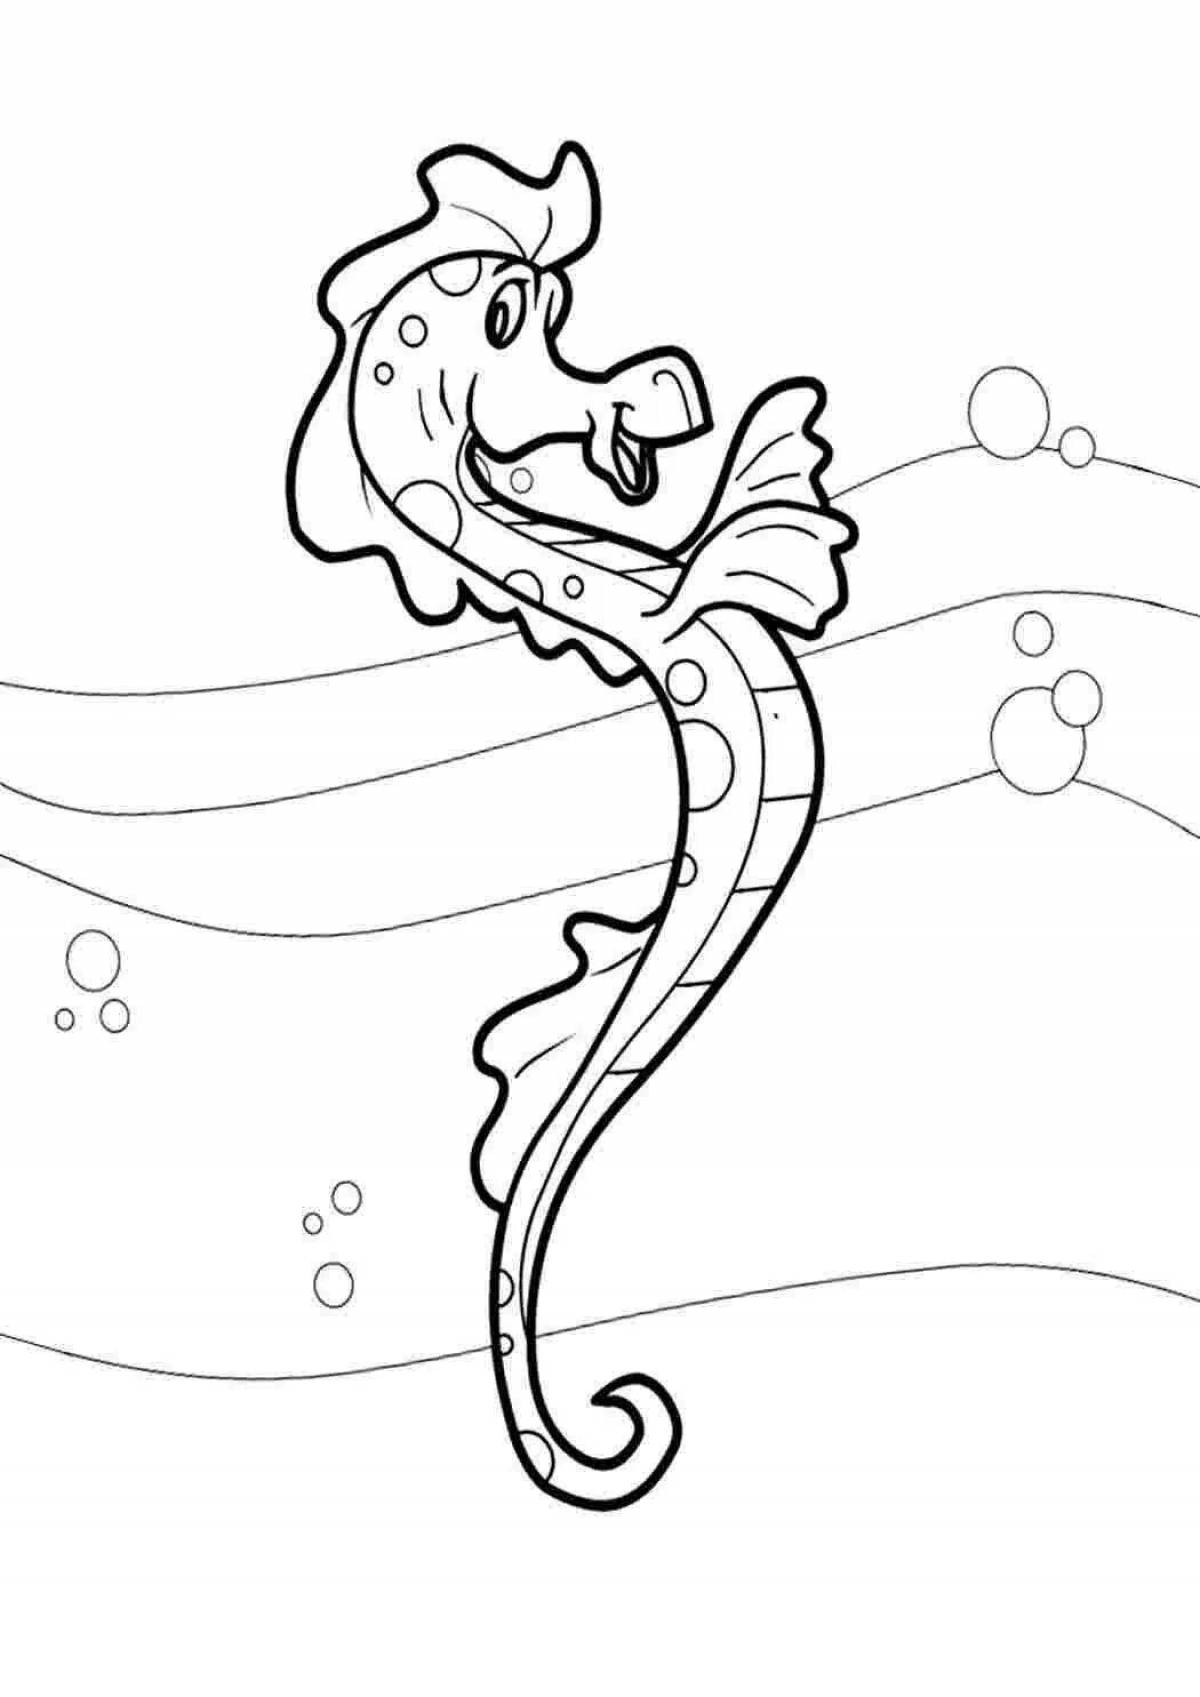 Outstanding seahorse coloring page for kids